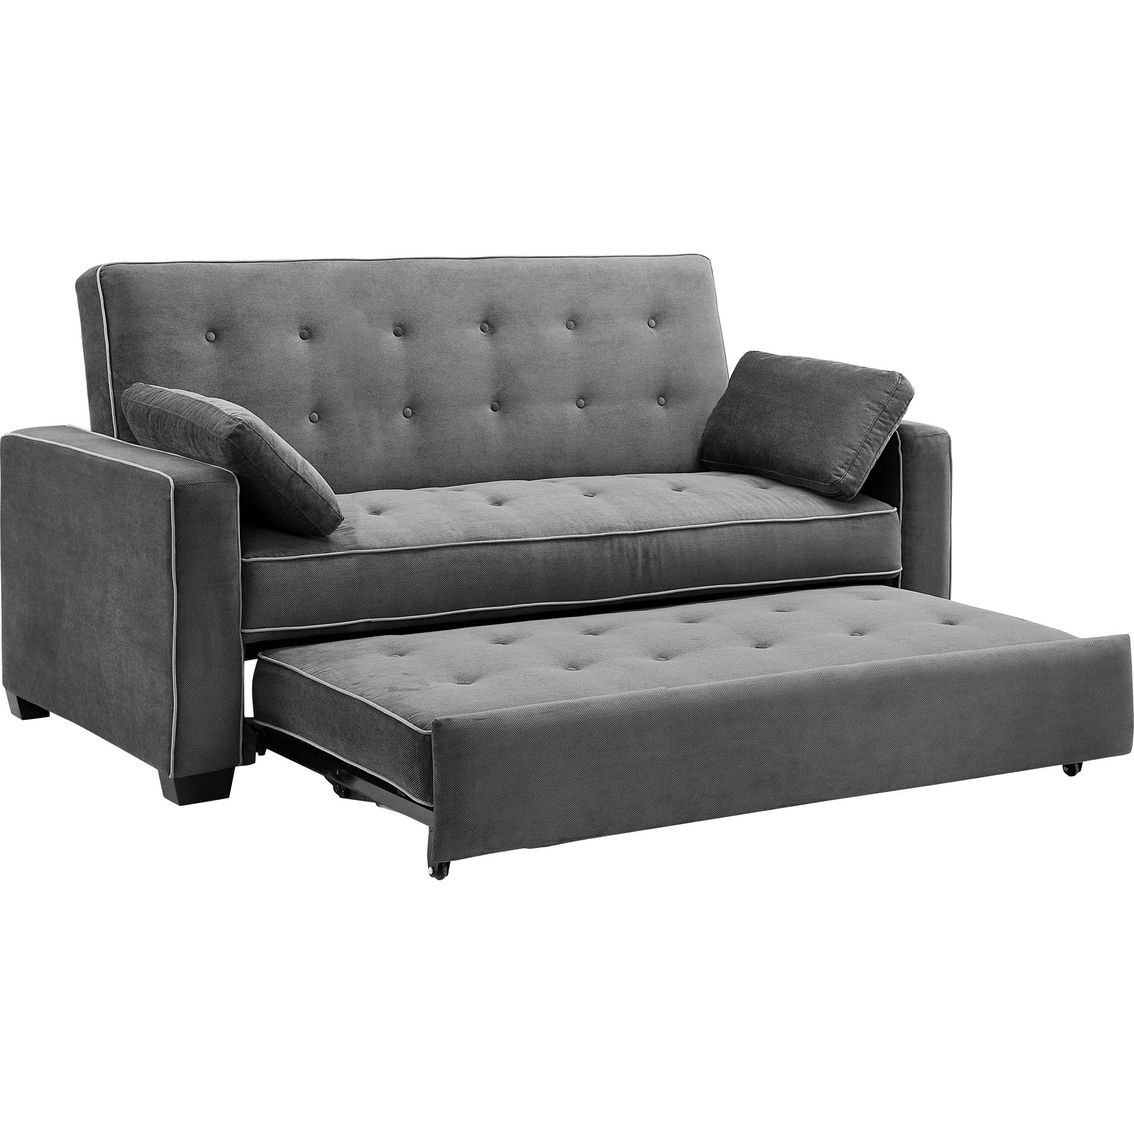 6 * 5 Feet Grey Convertible Sofa Bed, Rs 23000 /unit Viswak Enterprise Intended For Convertible Gray Loveseat Sleepers (View 18 of 20)